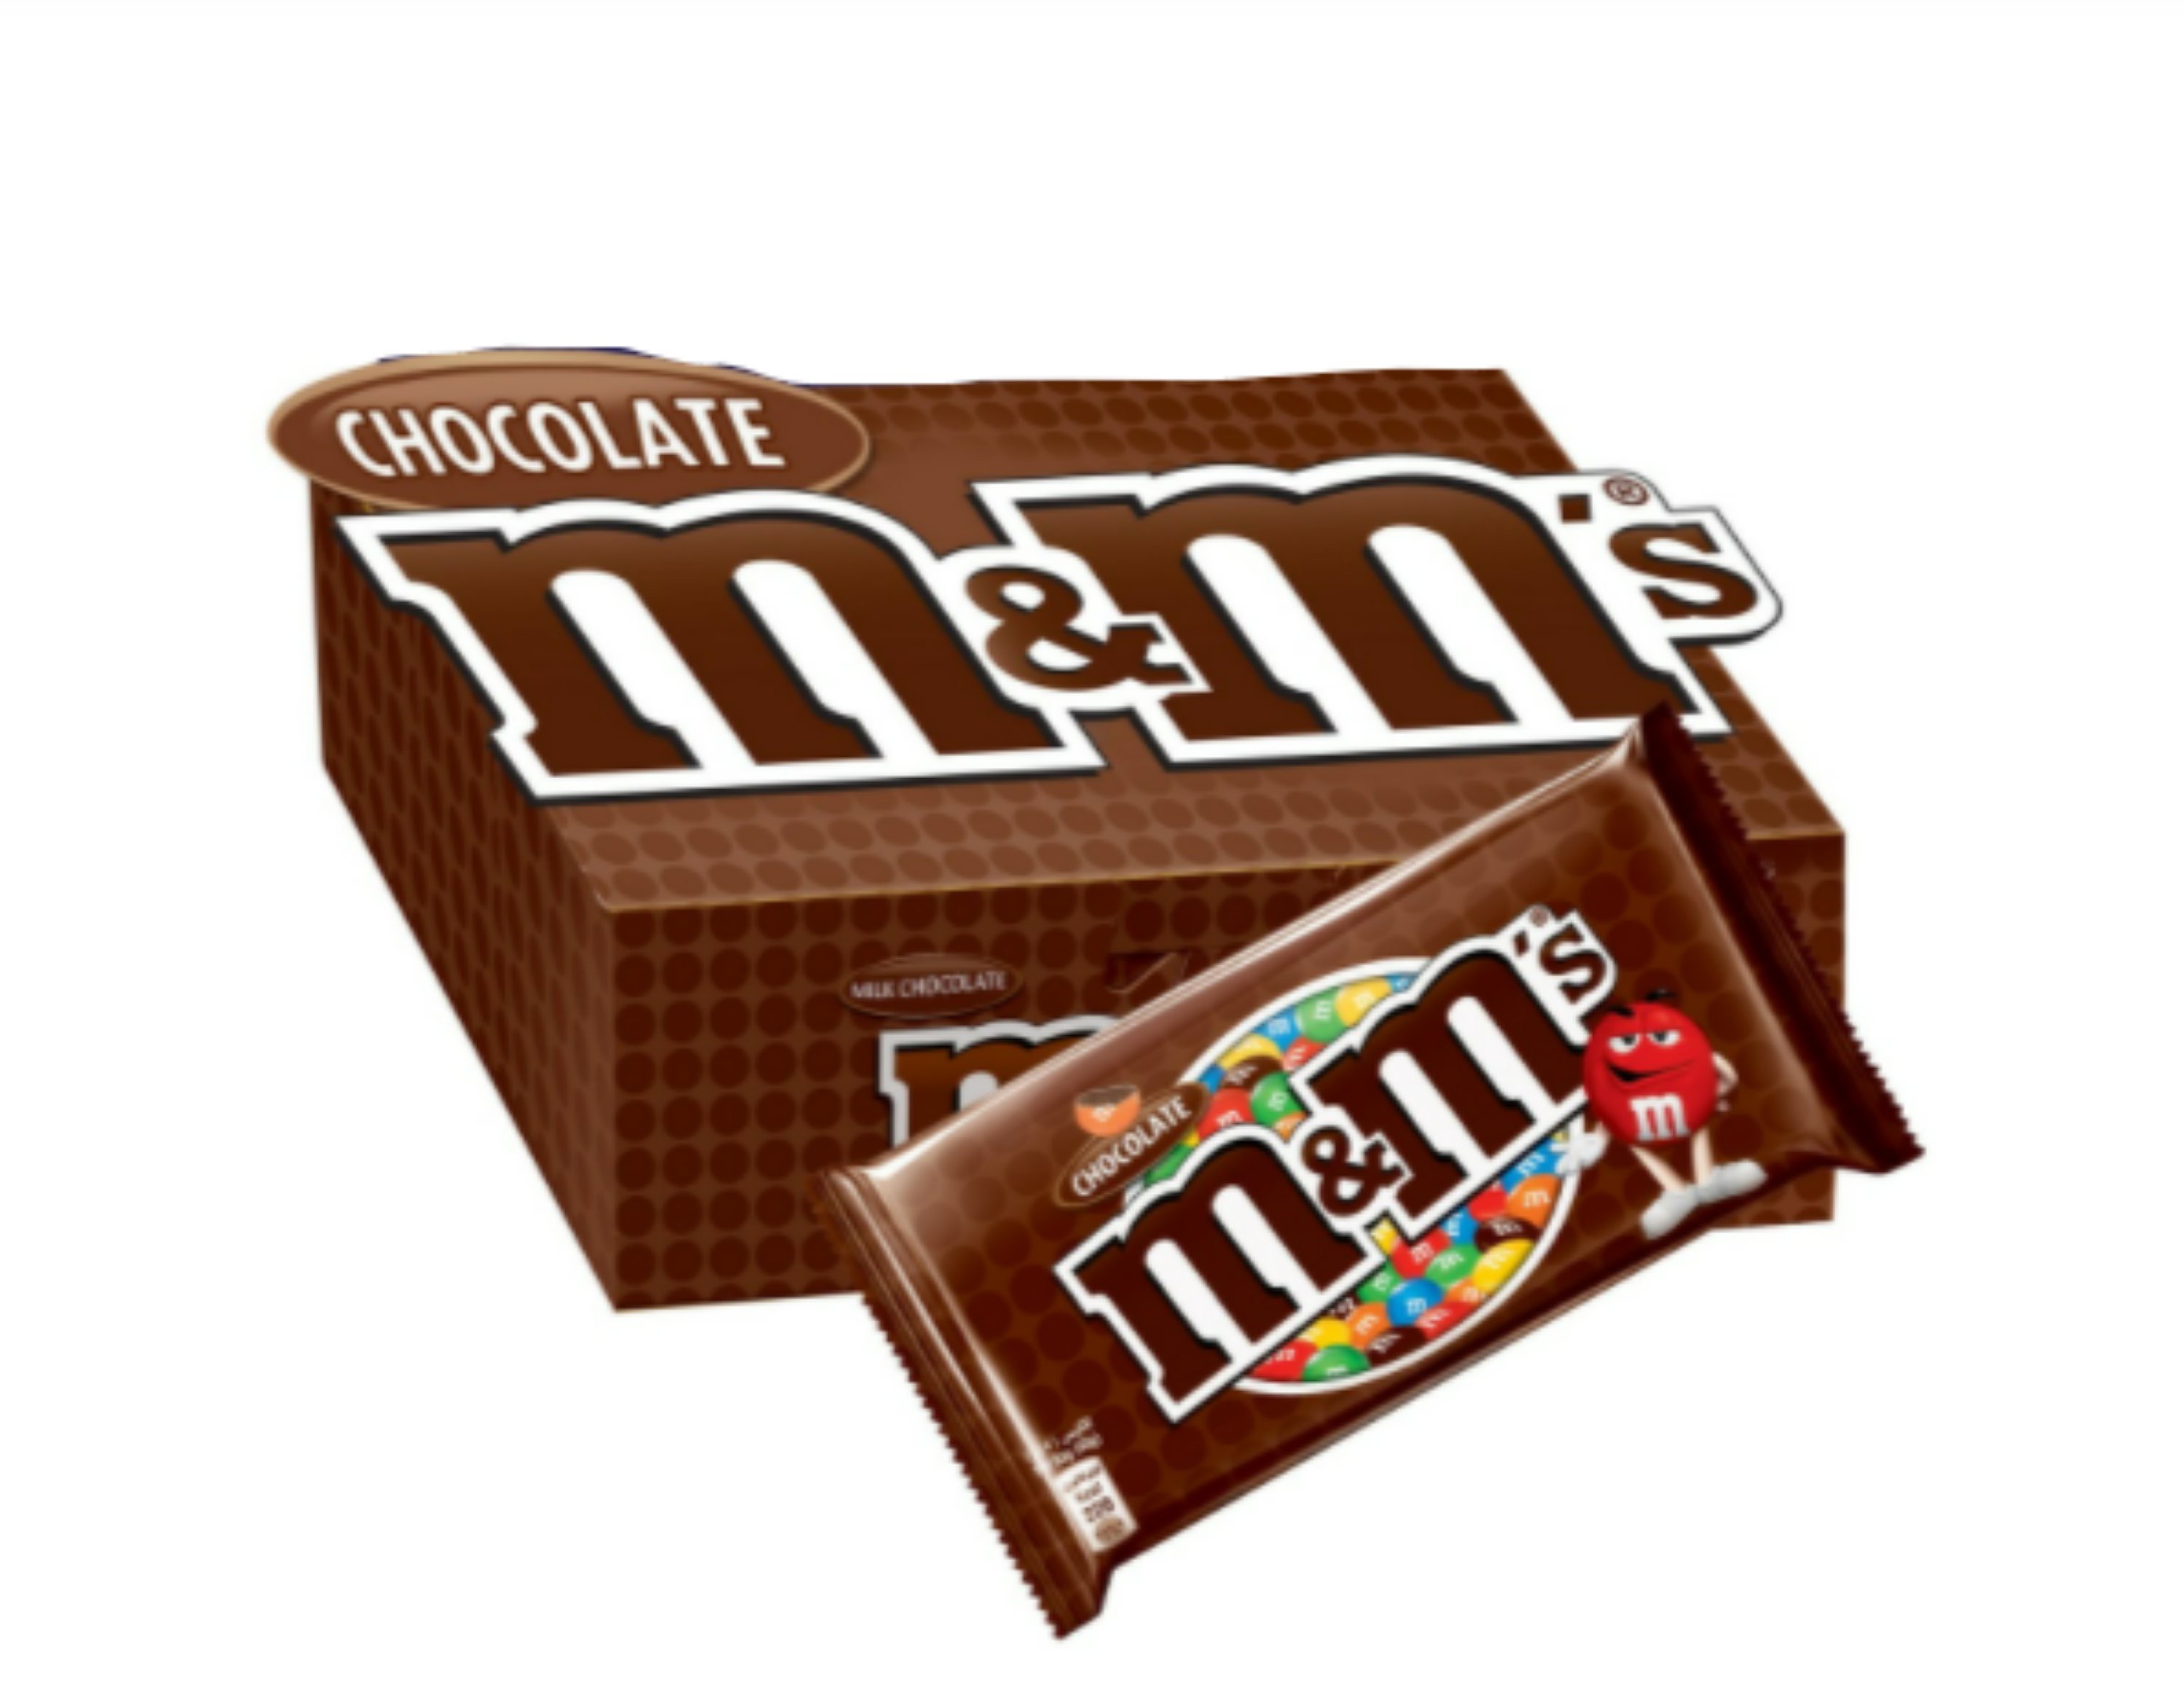 m&m's Milk Chocolate, 45g (pack of 6) Bars Price in India - Buy m&m's Milk  Chocolate, 45g (pack of 6) Bars online at